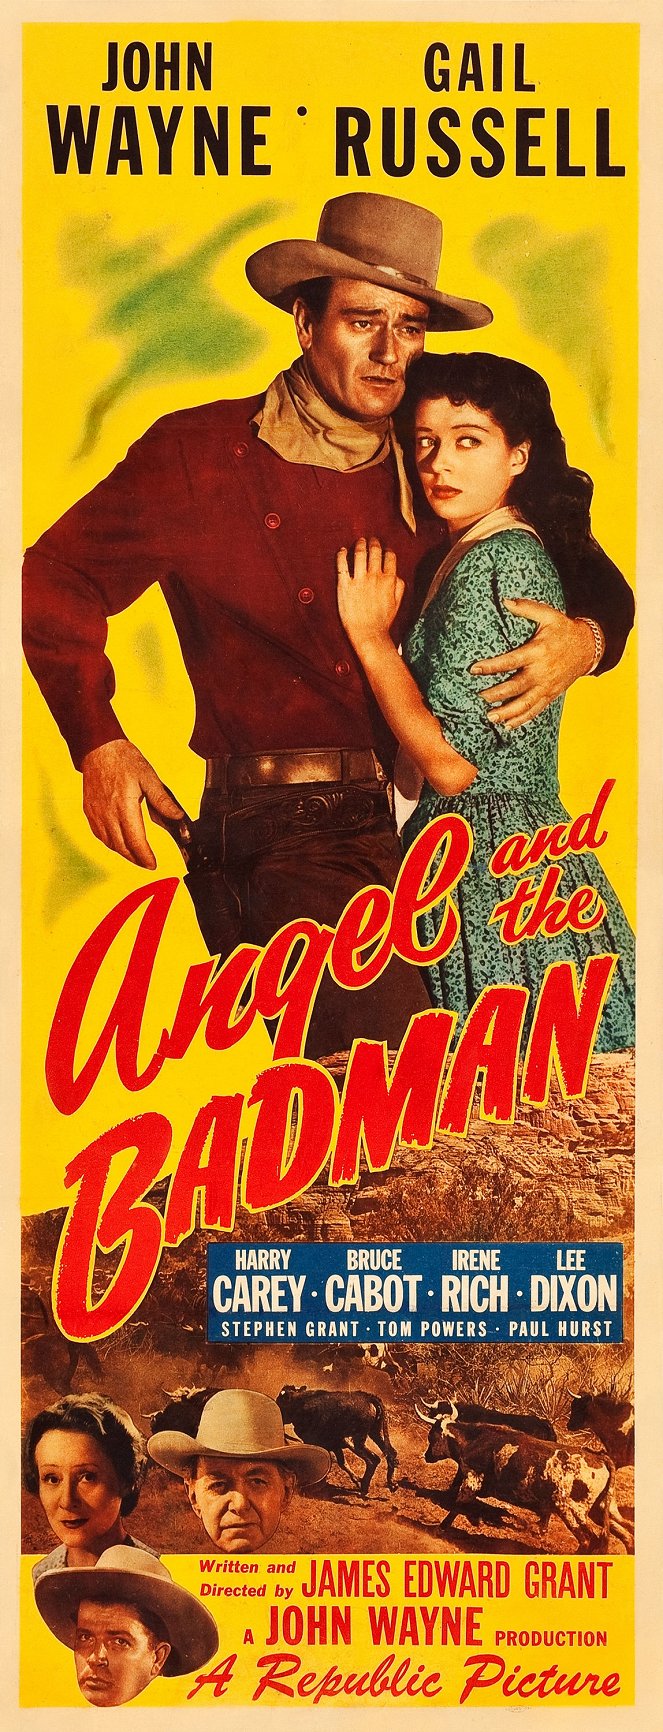 Angel and the Badman - Posters